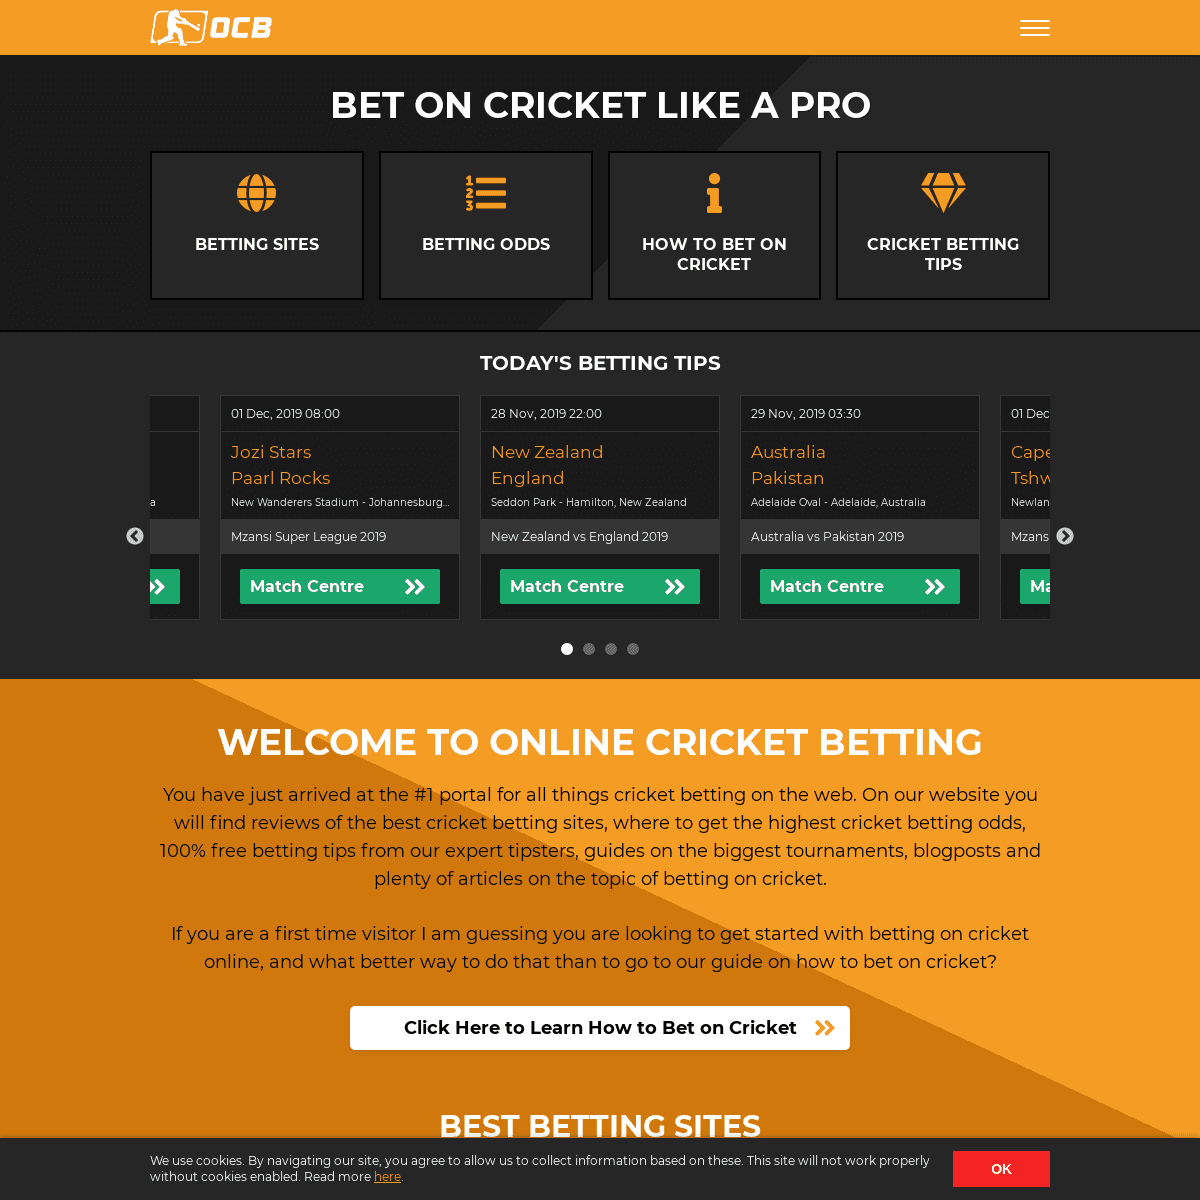 A complete backup of onlinecricketbetting.net